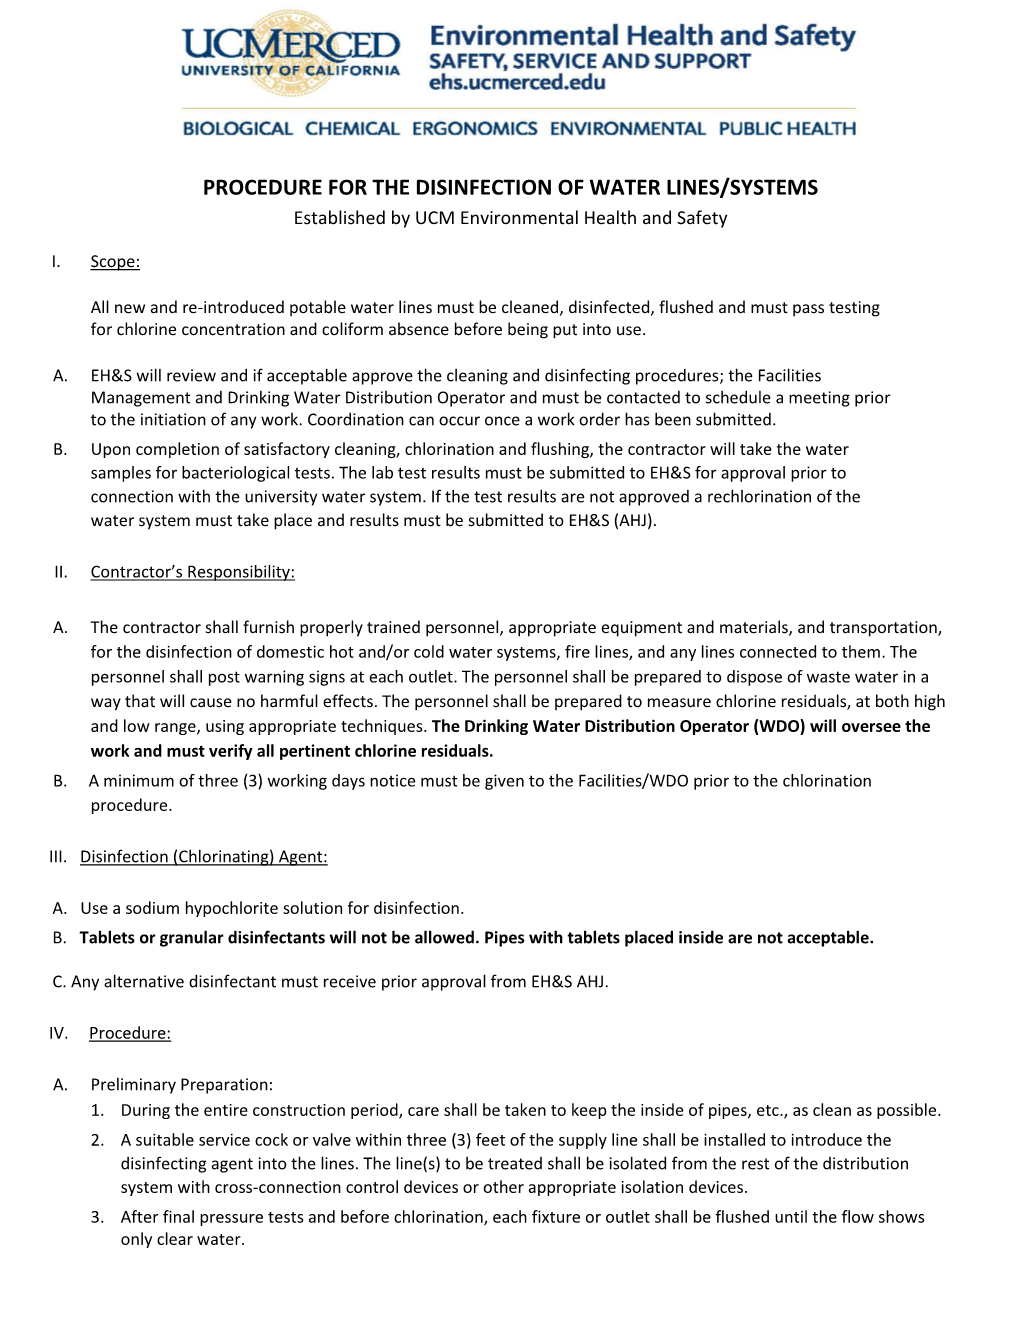 PROCEDURE for the DISINFECTION of WATER LINES/SYSTEMS Established by UCM Environmental Health and Safety